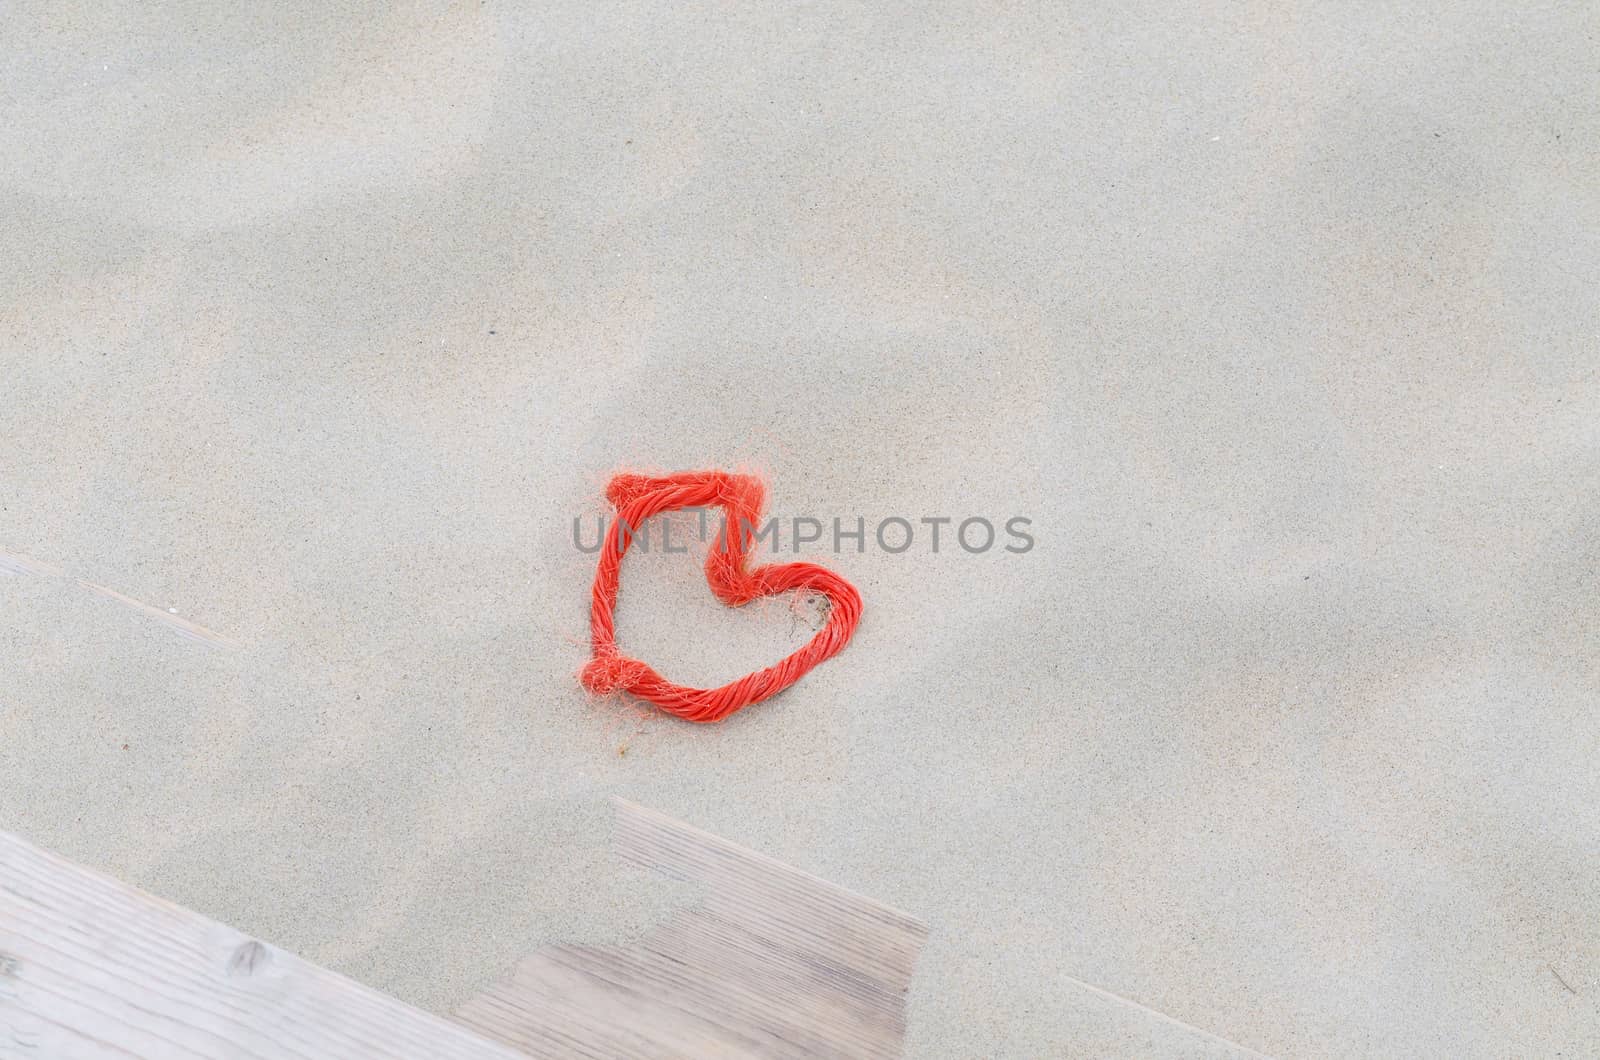  A red rope in heart shape in the sand. by JFsPic